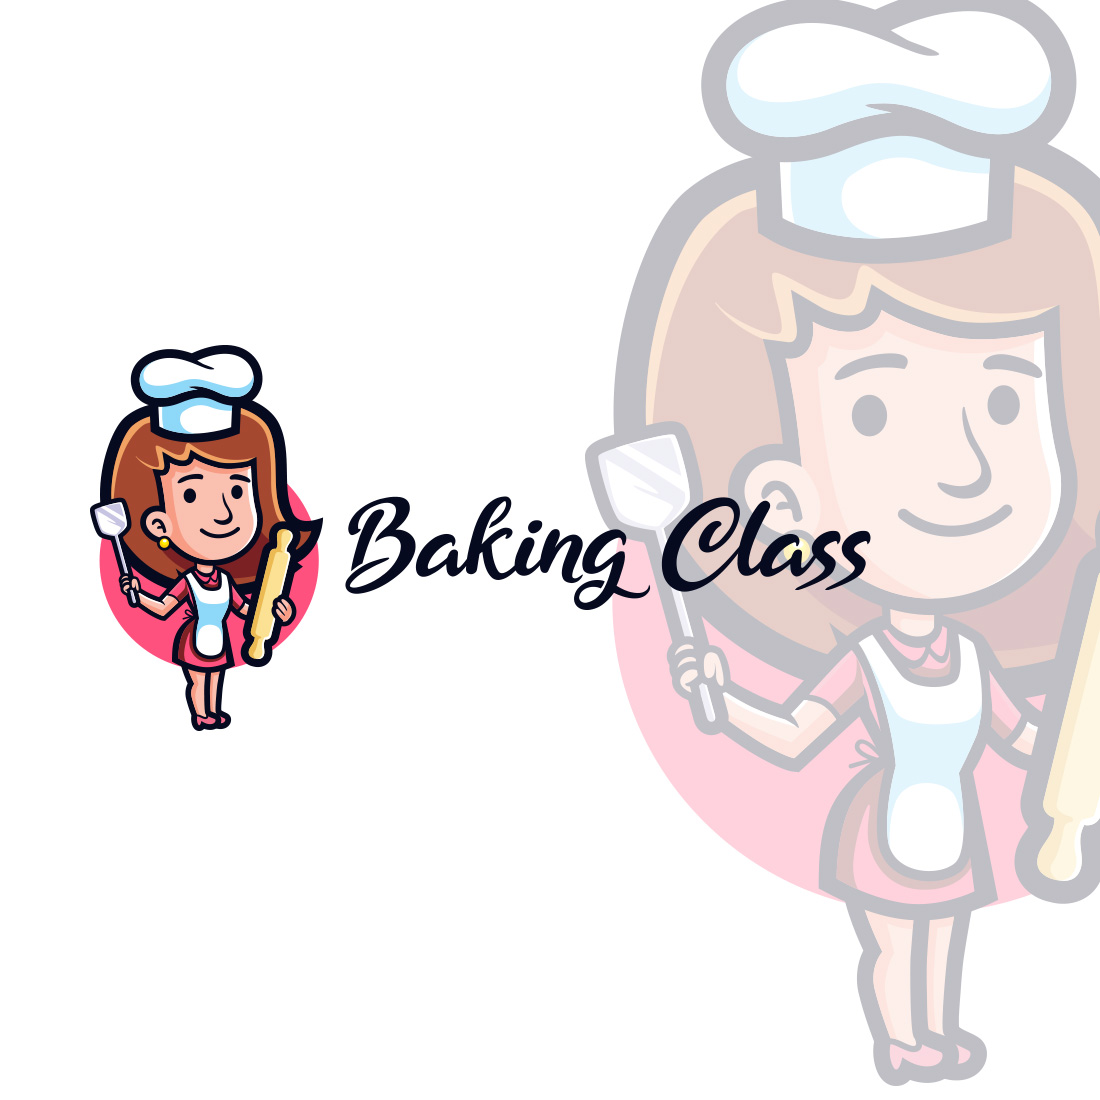 Female Cooking Mentor Character Logo Design cover image.